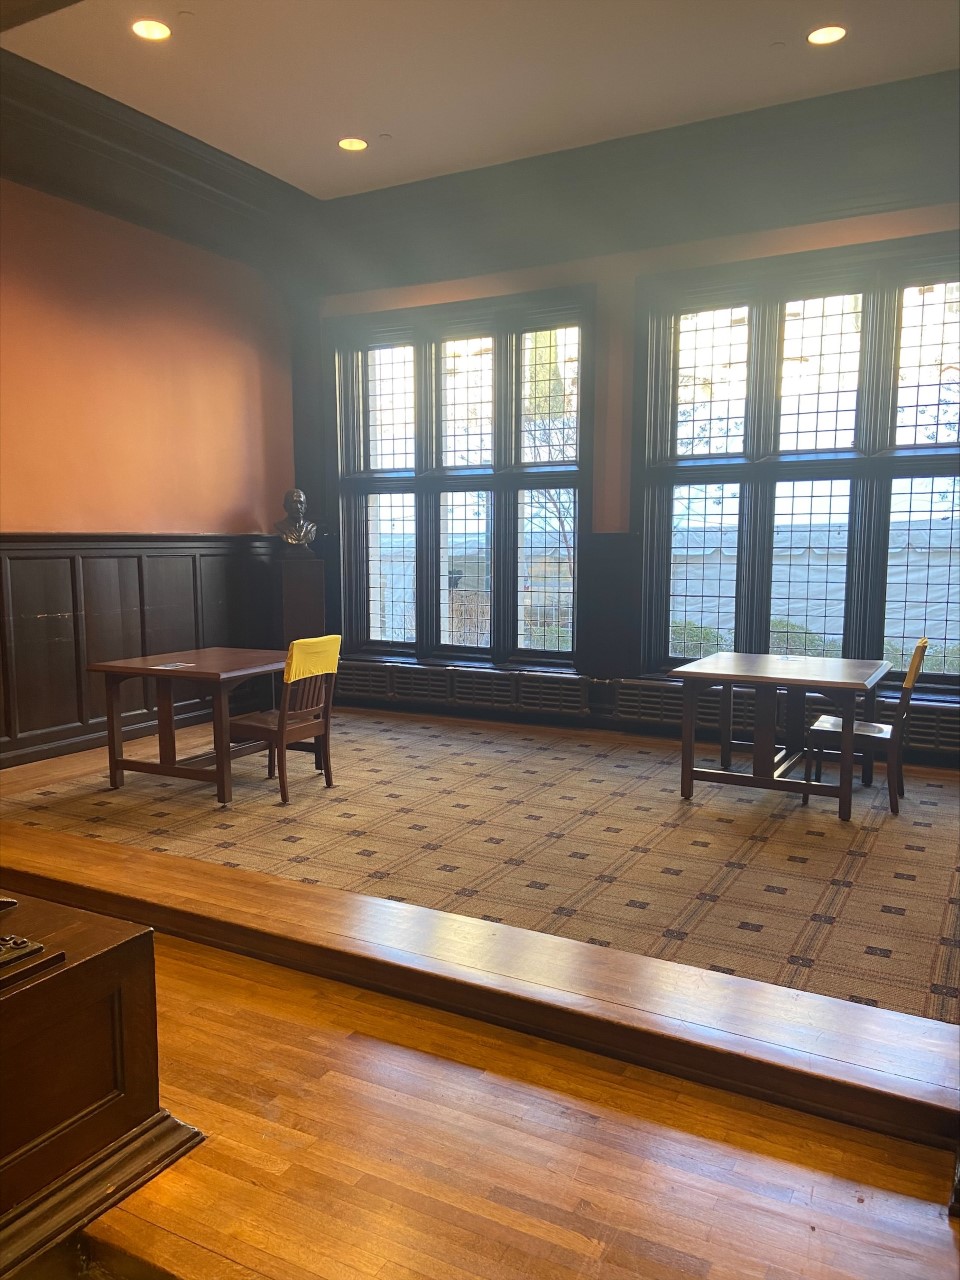 Socially Distanced Study & Lounge Space at Houston Hall Reading Room